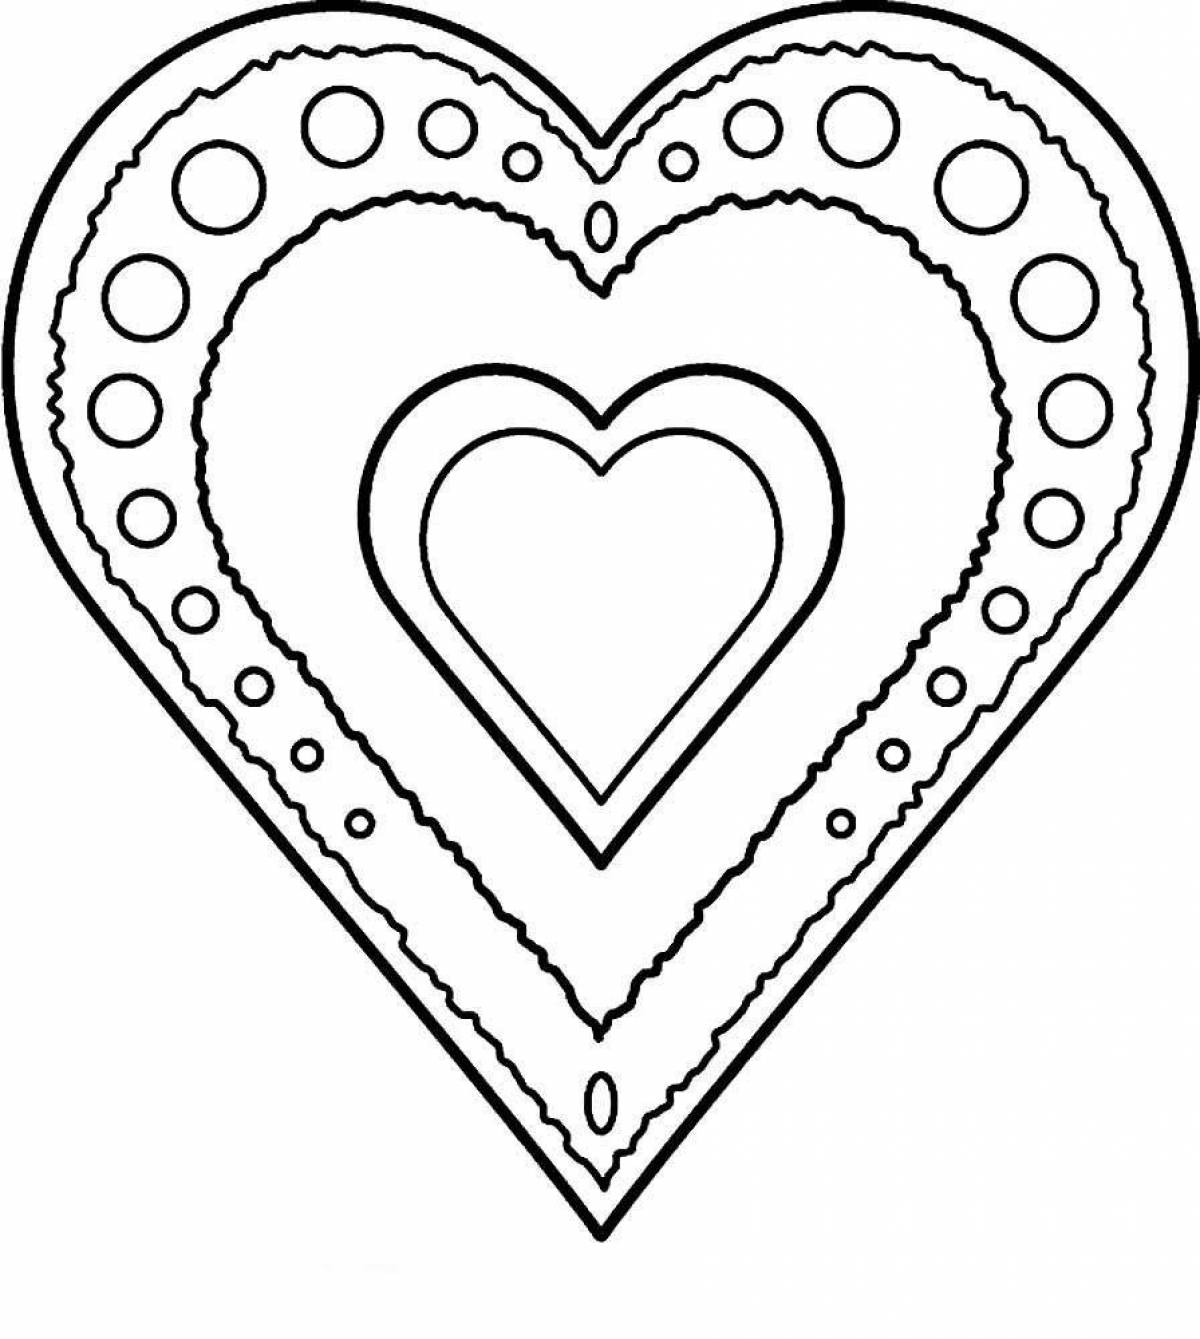 Colorful heart coloring book for kids